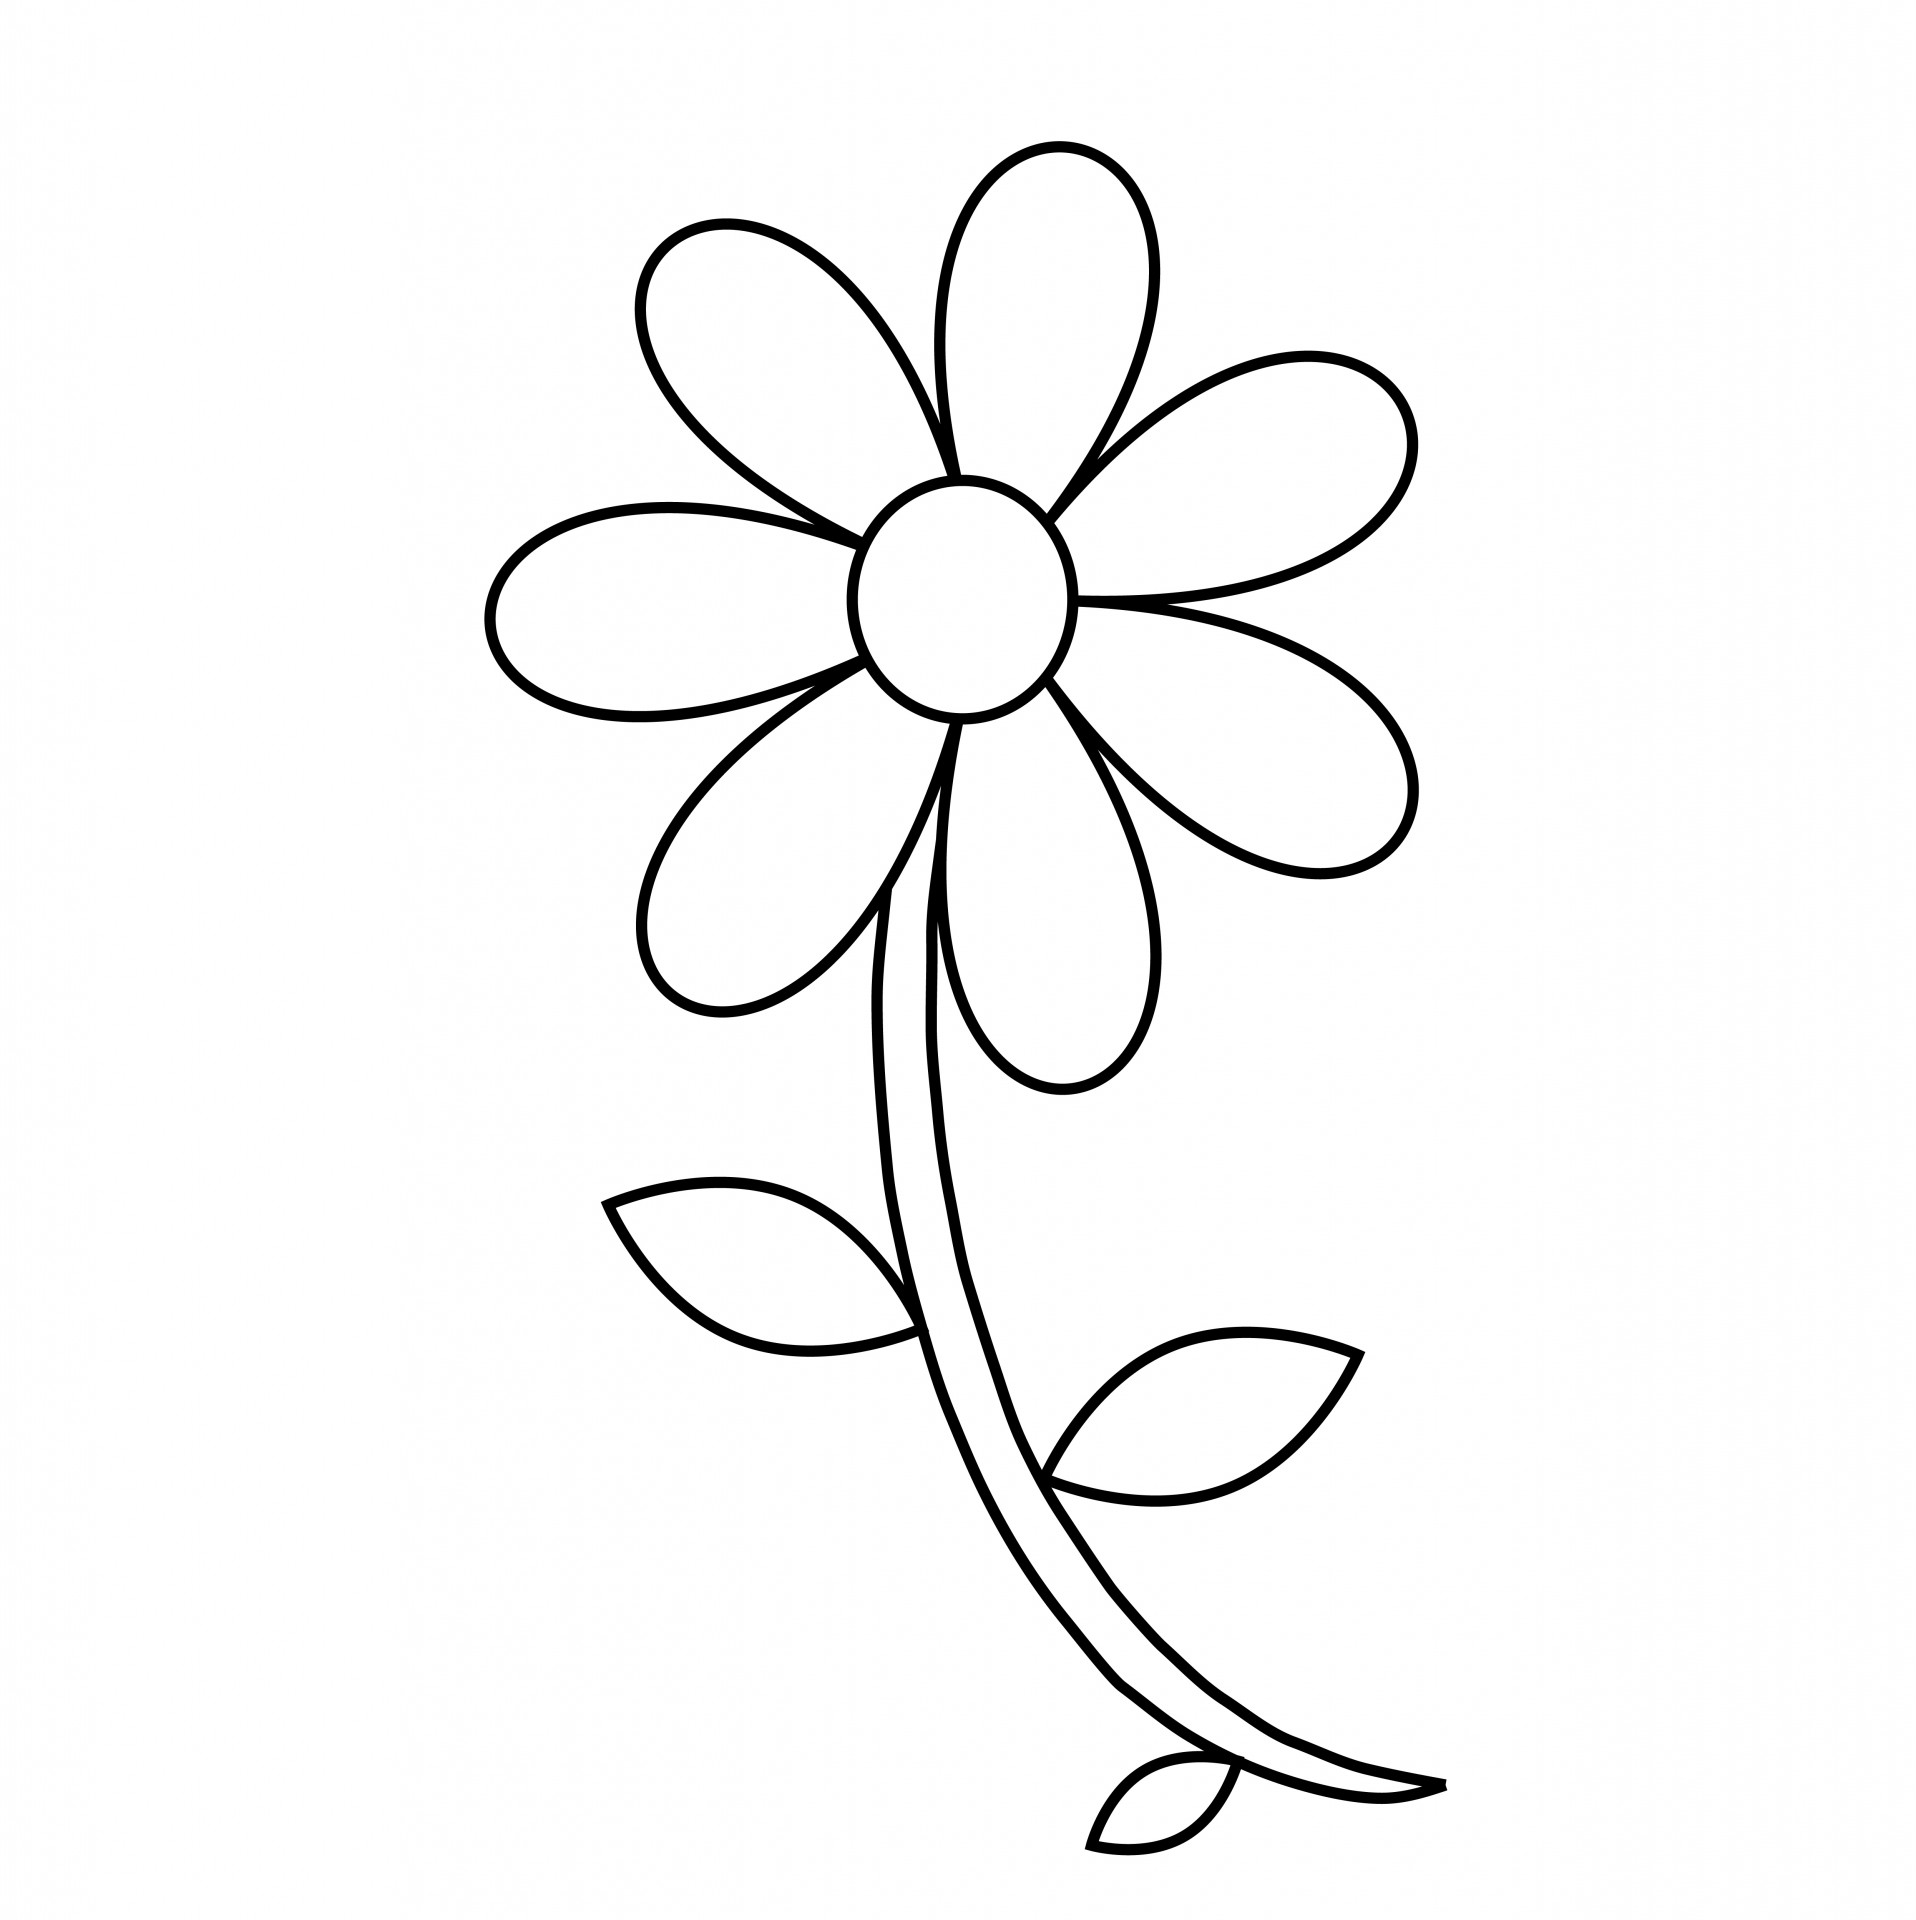 Black And White Flower Outline - Cliparts.co